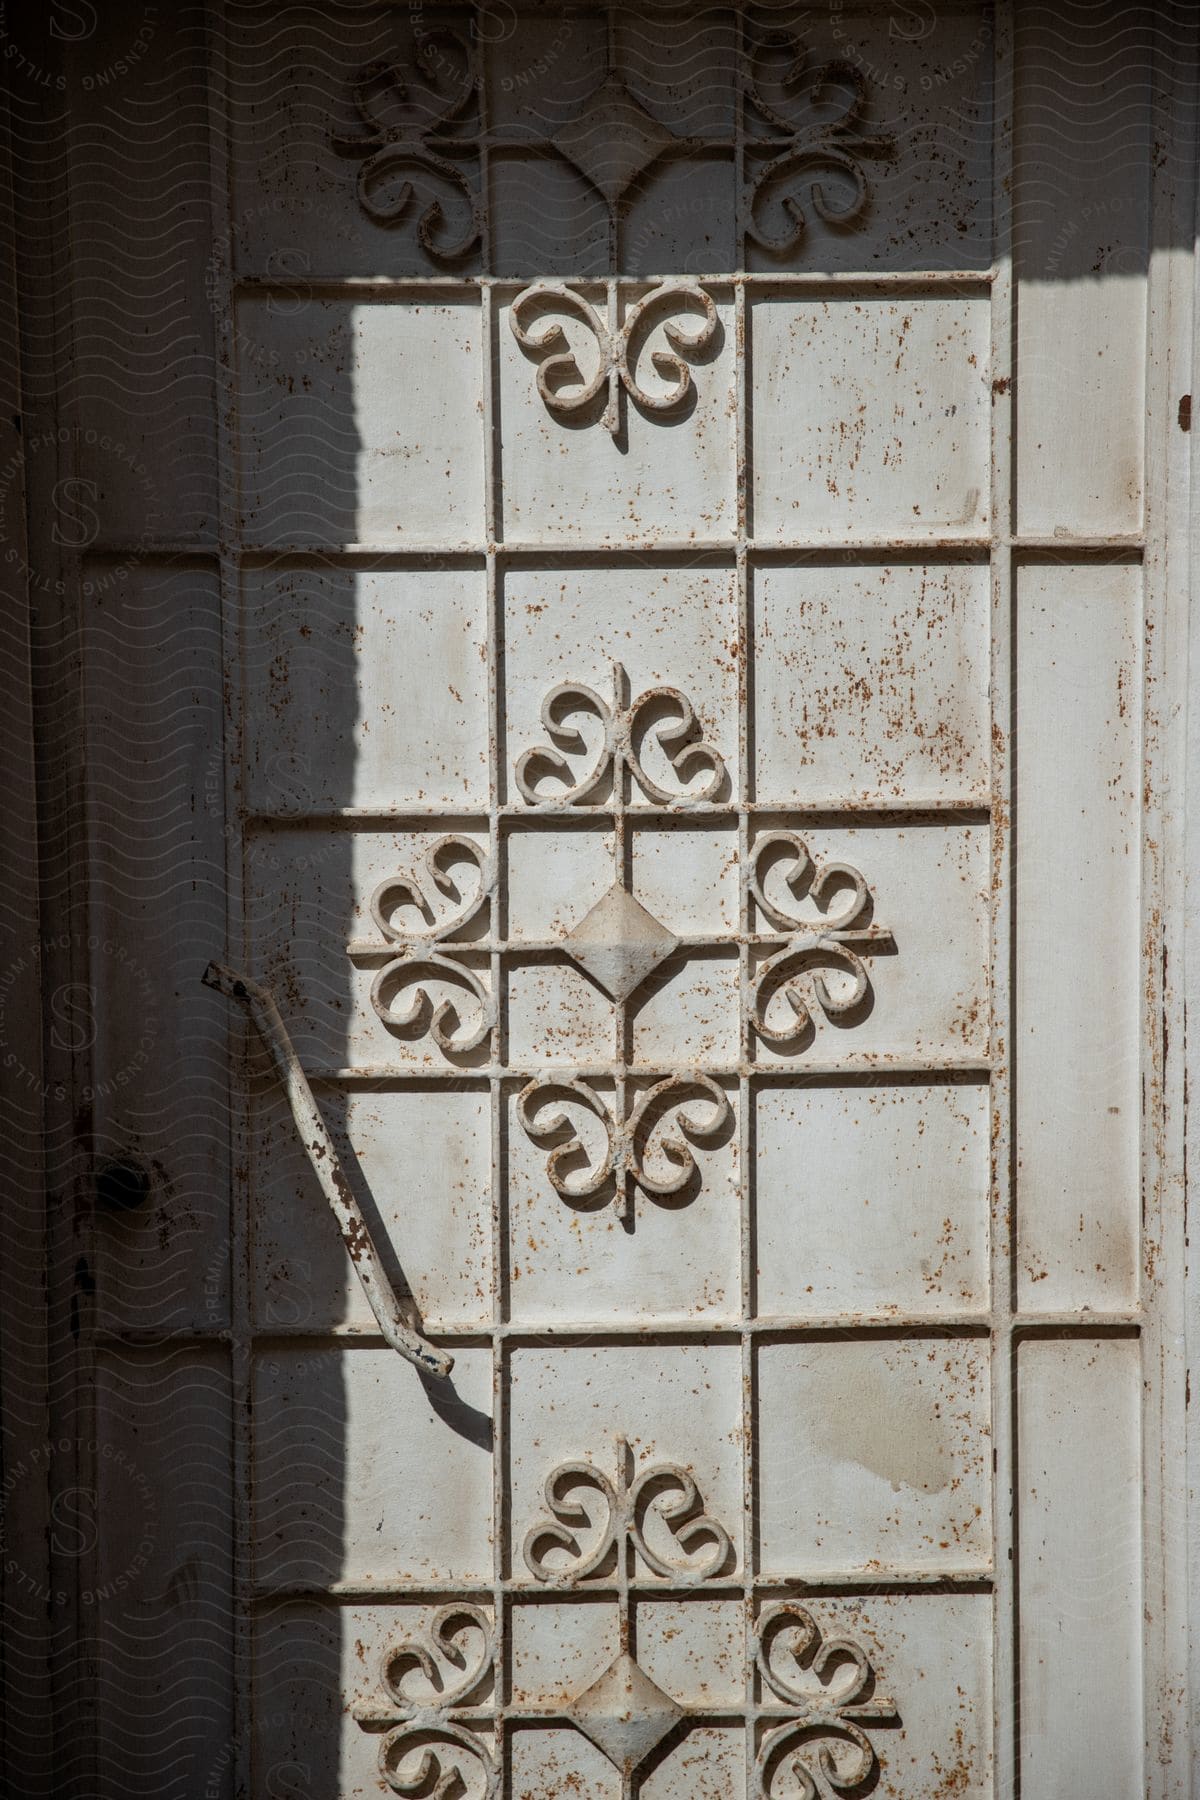 A metal door with decorative detail and a simple metal handle